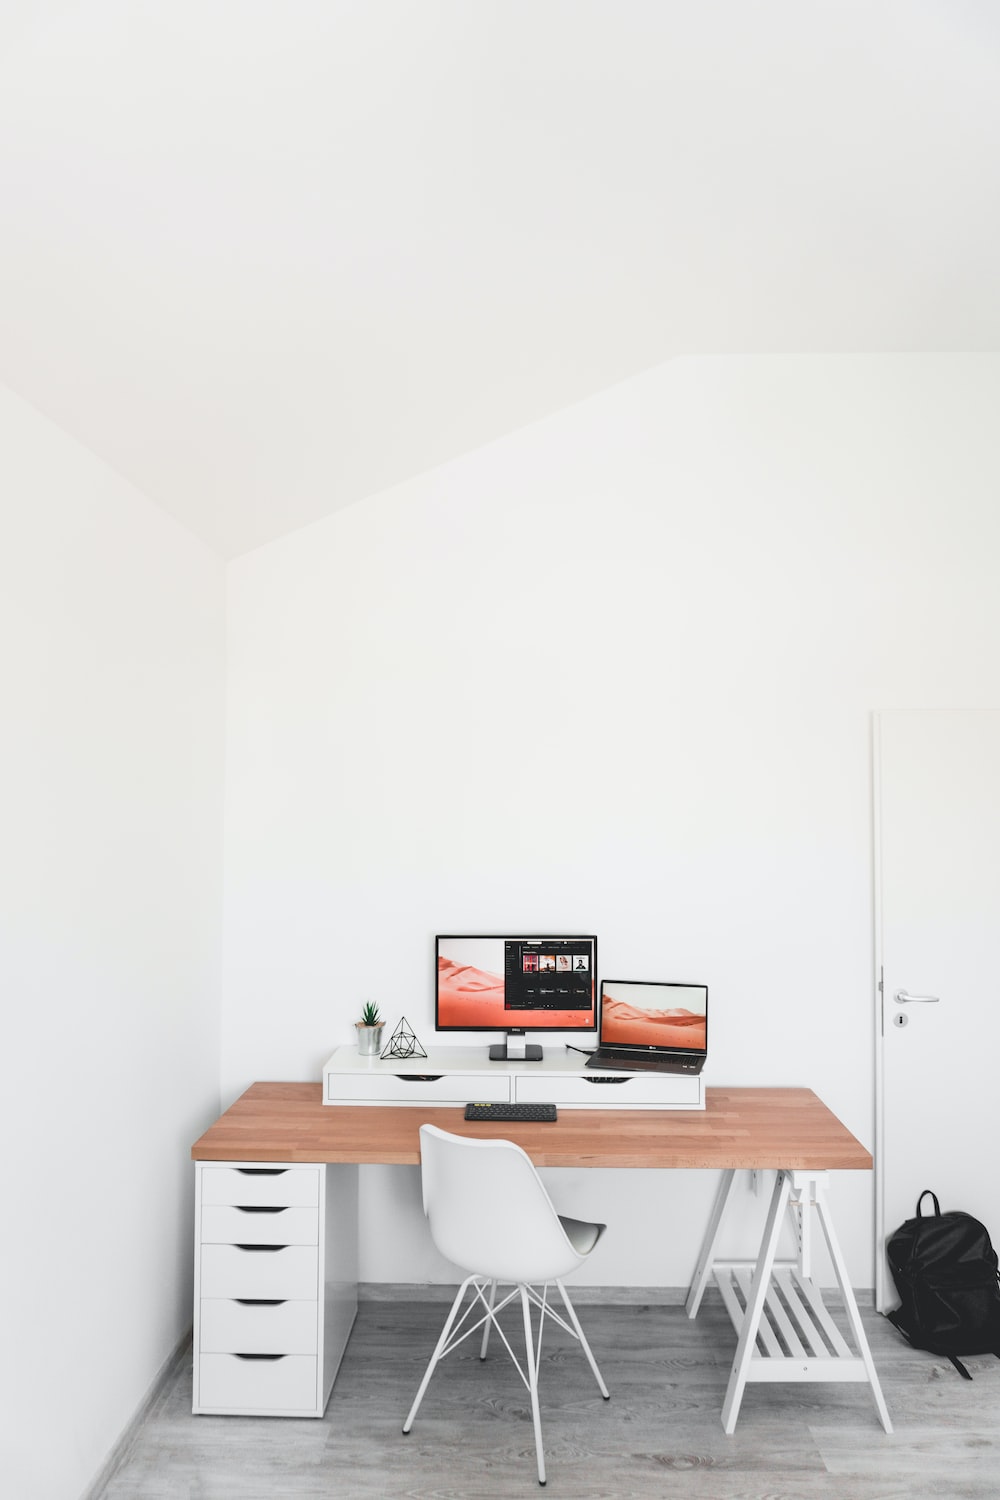 Should you have your desk facing a wall?